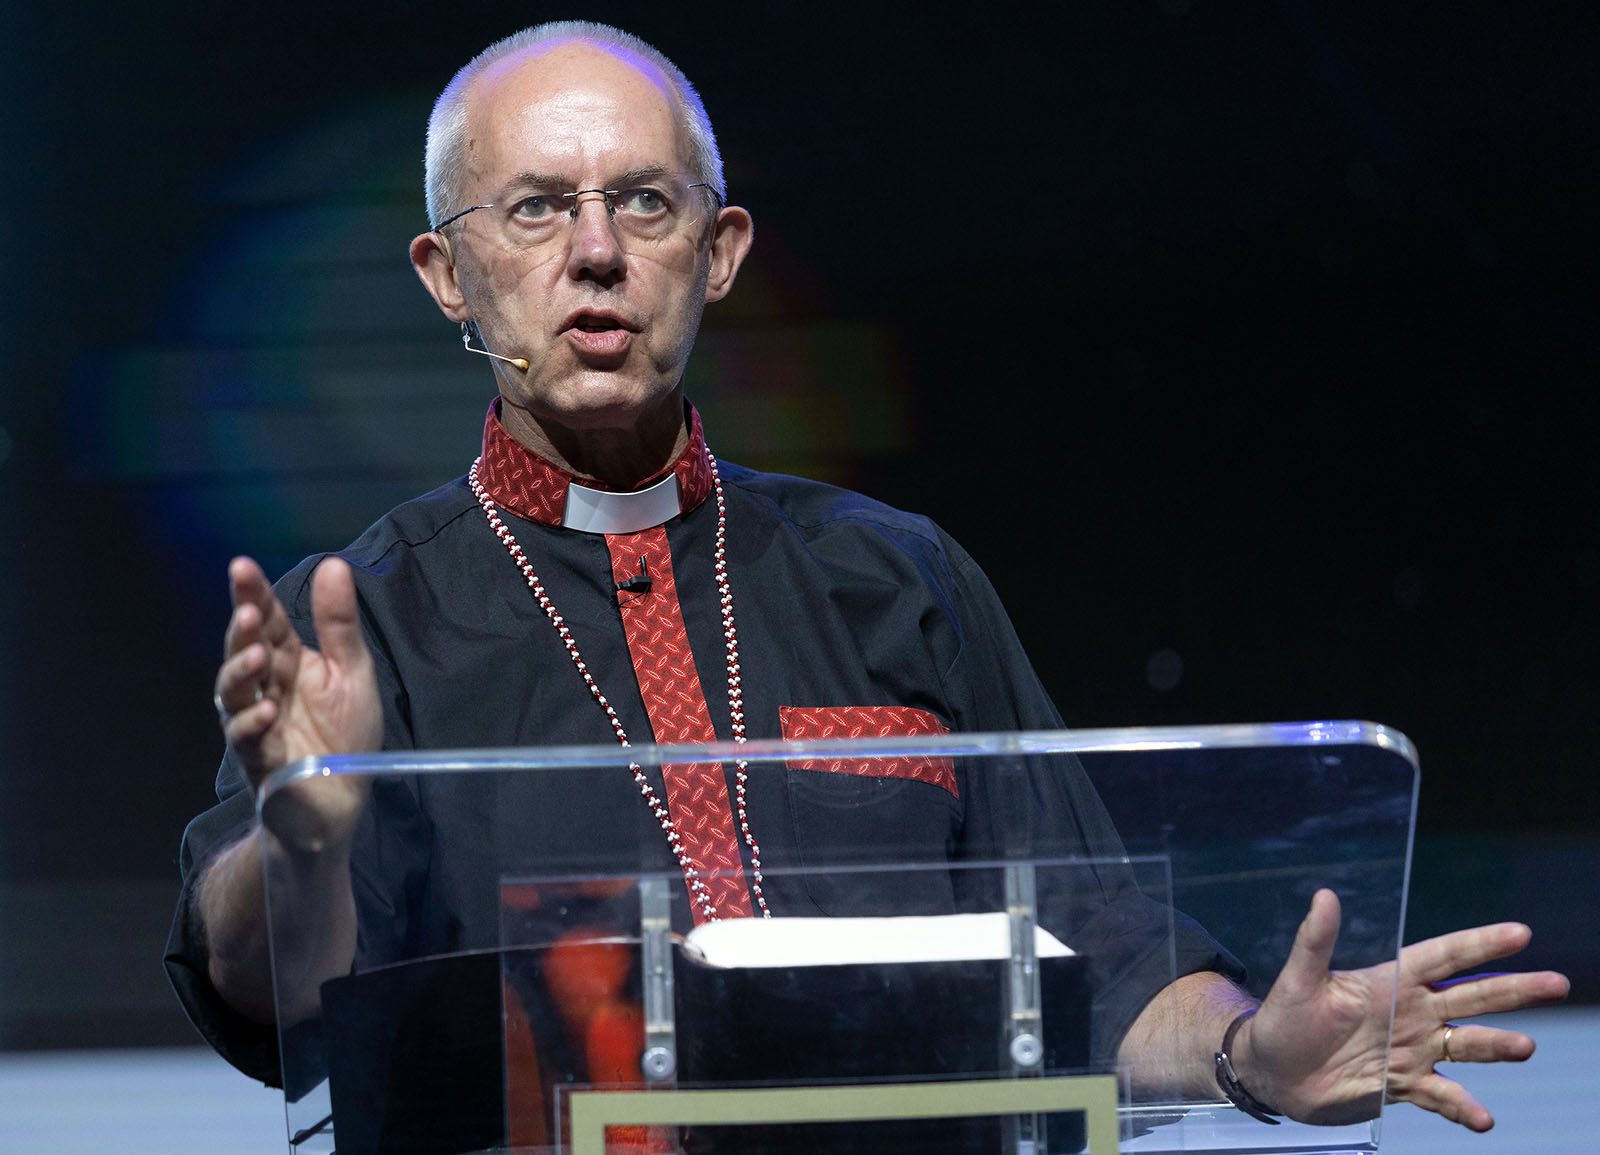 Justin Welby, Archbishop of Canterbury, gives his first keynote address during the 2022 Lambeth Conference, held at The University of Kent in Canterbury, England, Friday, July 29, 2022. Photo by Neil Turner for The Lambeth Conference